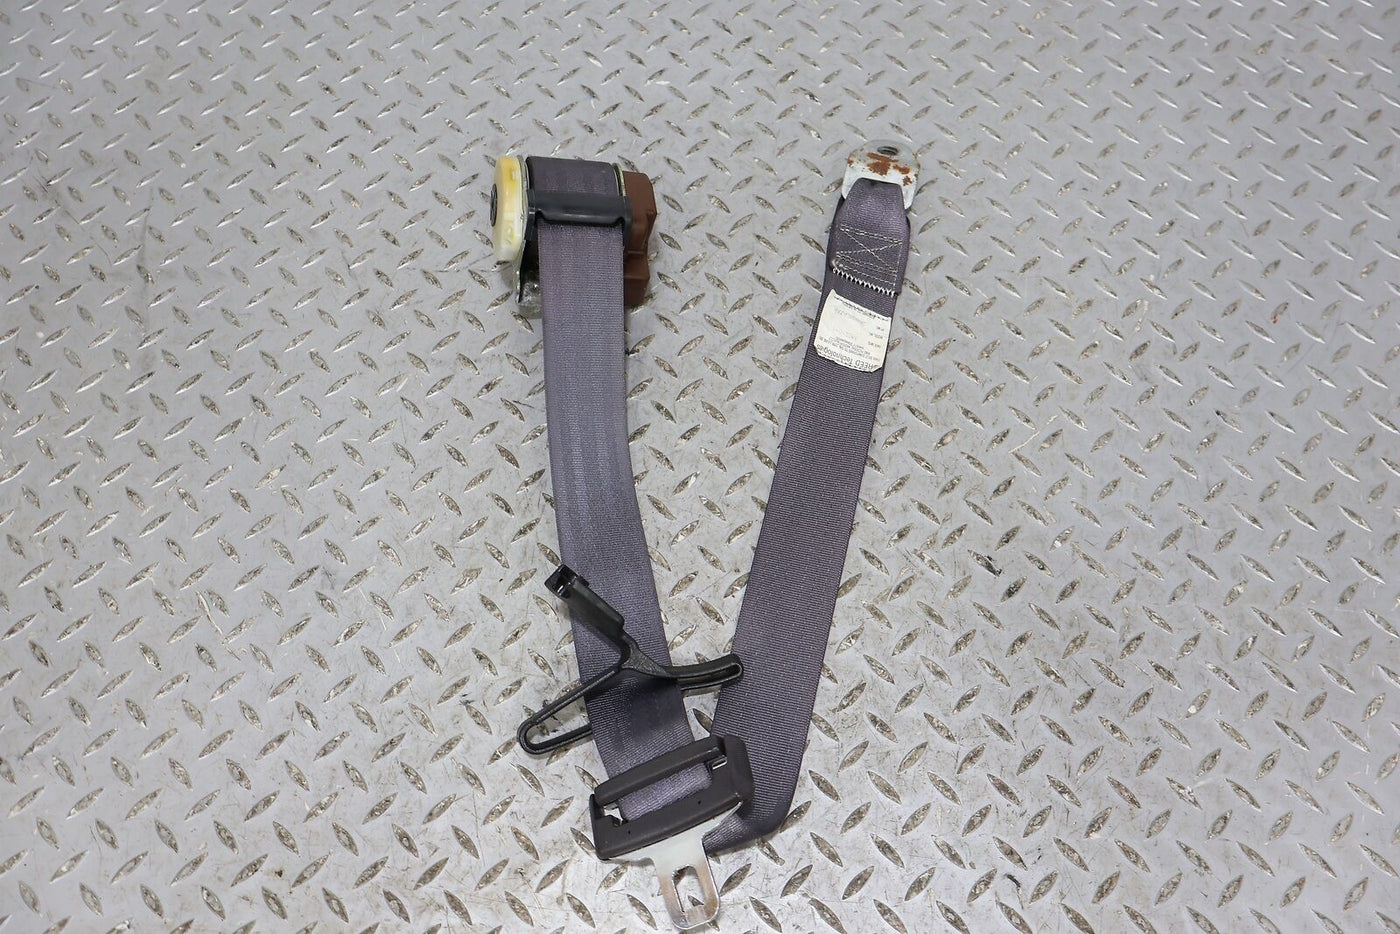 00-02 Plymouth Chrysler Prowler Right RH Seat Belt Retractor (Agate AZ) Tested